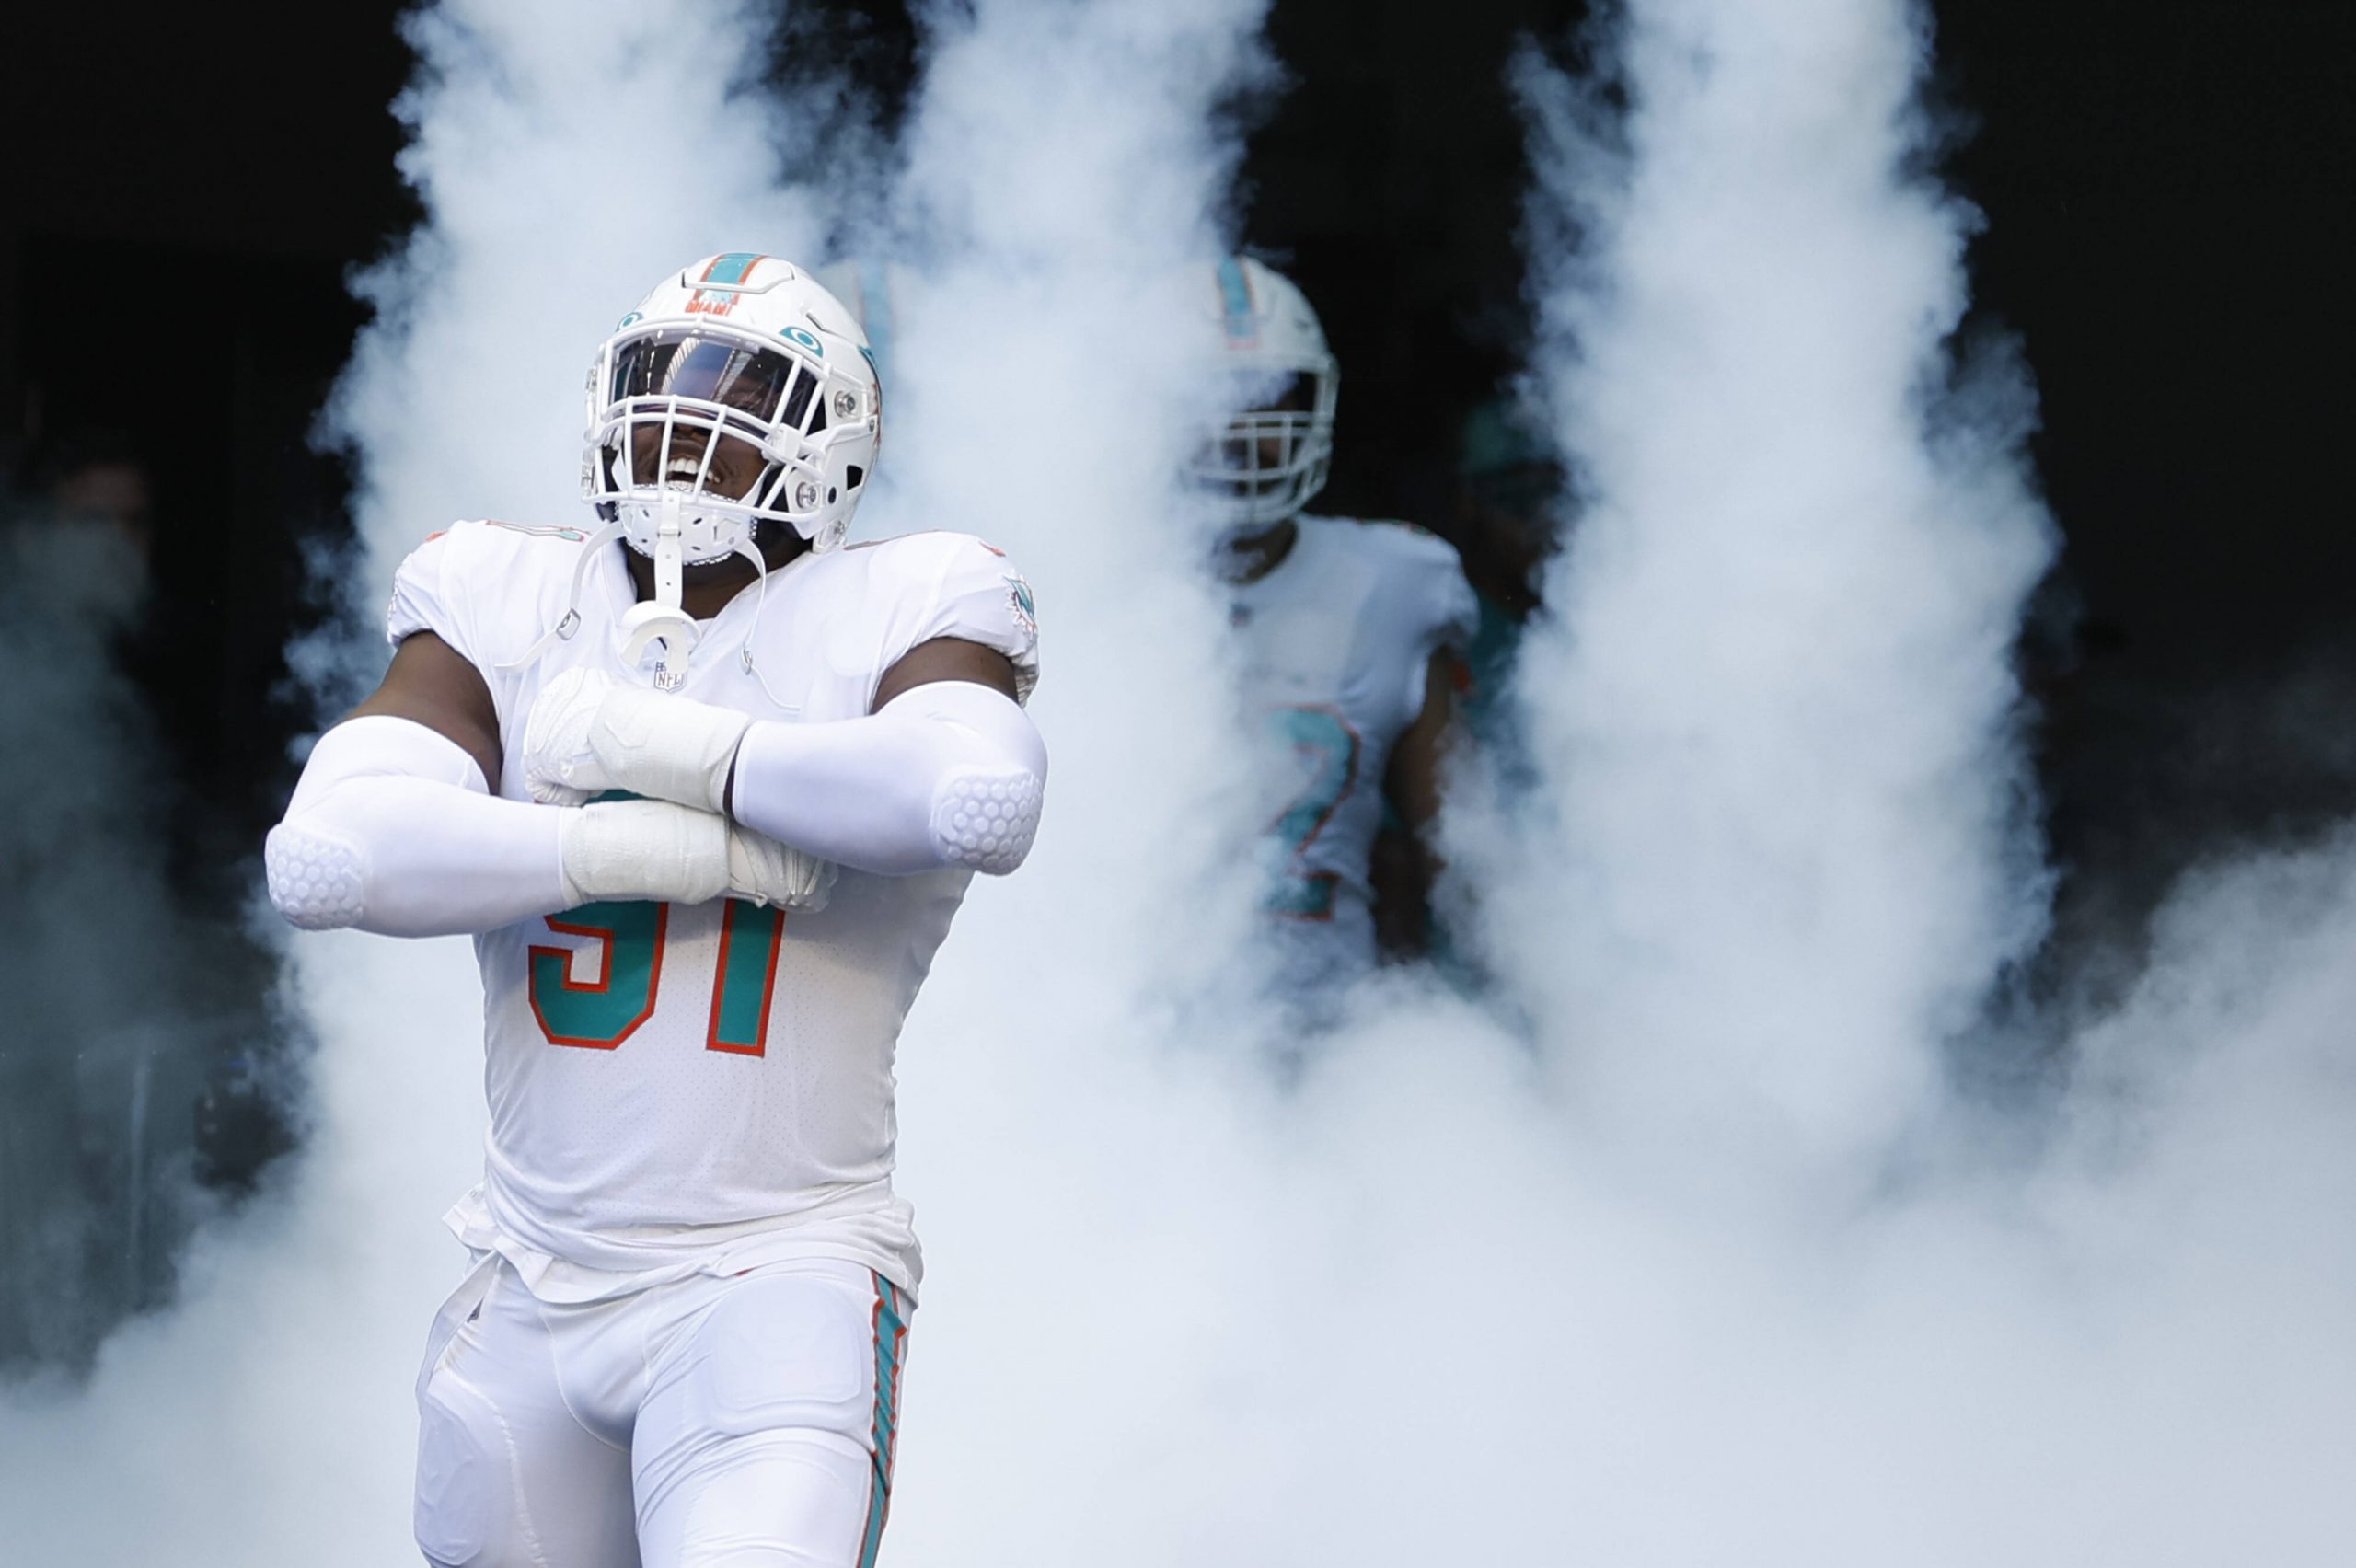 MIAMI GARDENS, FL - SEPTEMBER 25: Miami Dolphins defensive end Emmanuel Ogbah 91 during player intros before the game between the Buffalo Bills and the Miami Dolphins on September 25, 2022 at Hard Rock Stadium in Miami Gardens, Fl. Photo by David Rosenblum/Icon Sportswire NFL, American Football Herren, USA SEP 25 Bills at Dolphins Icon220925220693